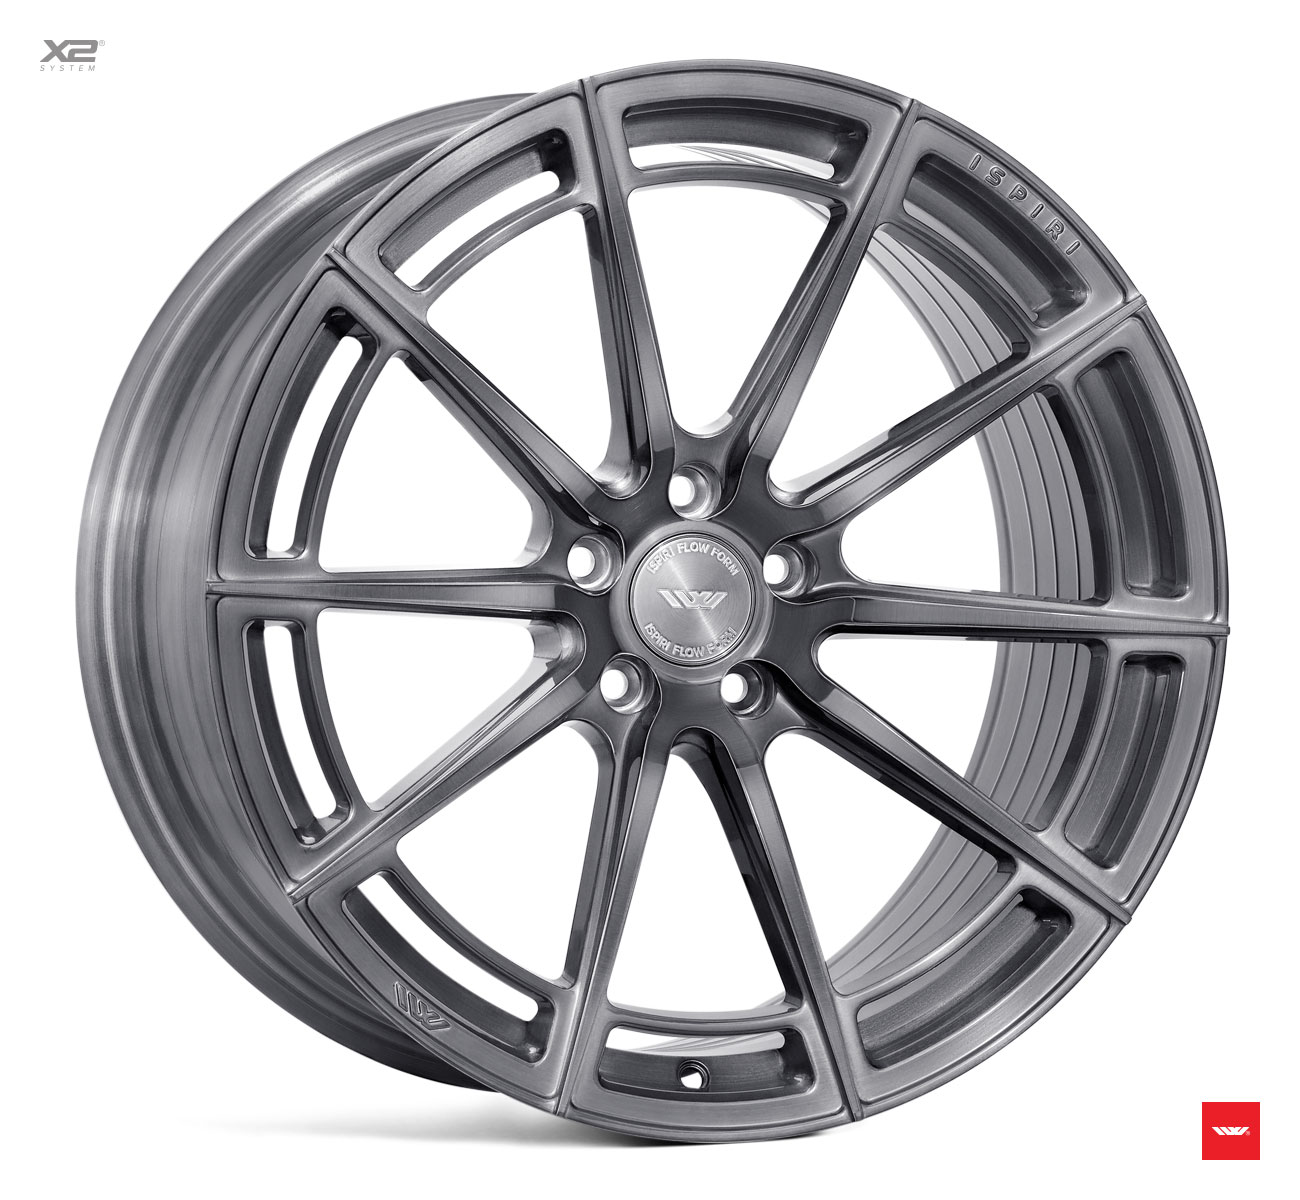 NEW 20" ISPIRI FFR2 MULTI-SPOKE ALLOY WHEELS IN FULL BRUSHED CARBON TITANIUM , DEEP CONCAVE 10.5" ALL ROUND